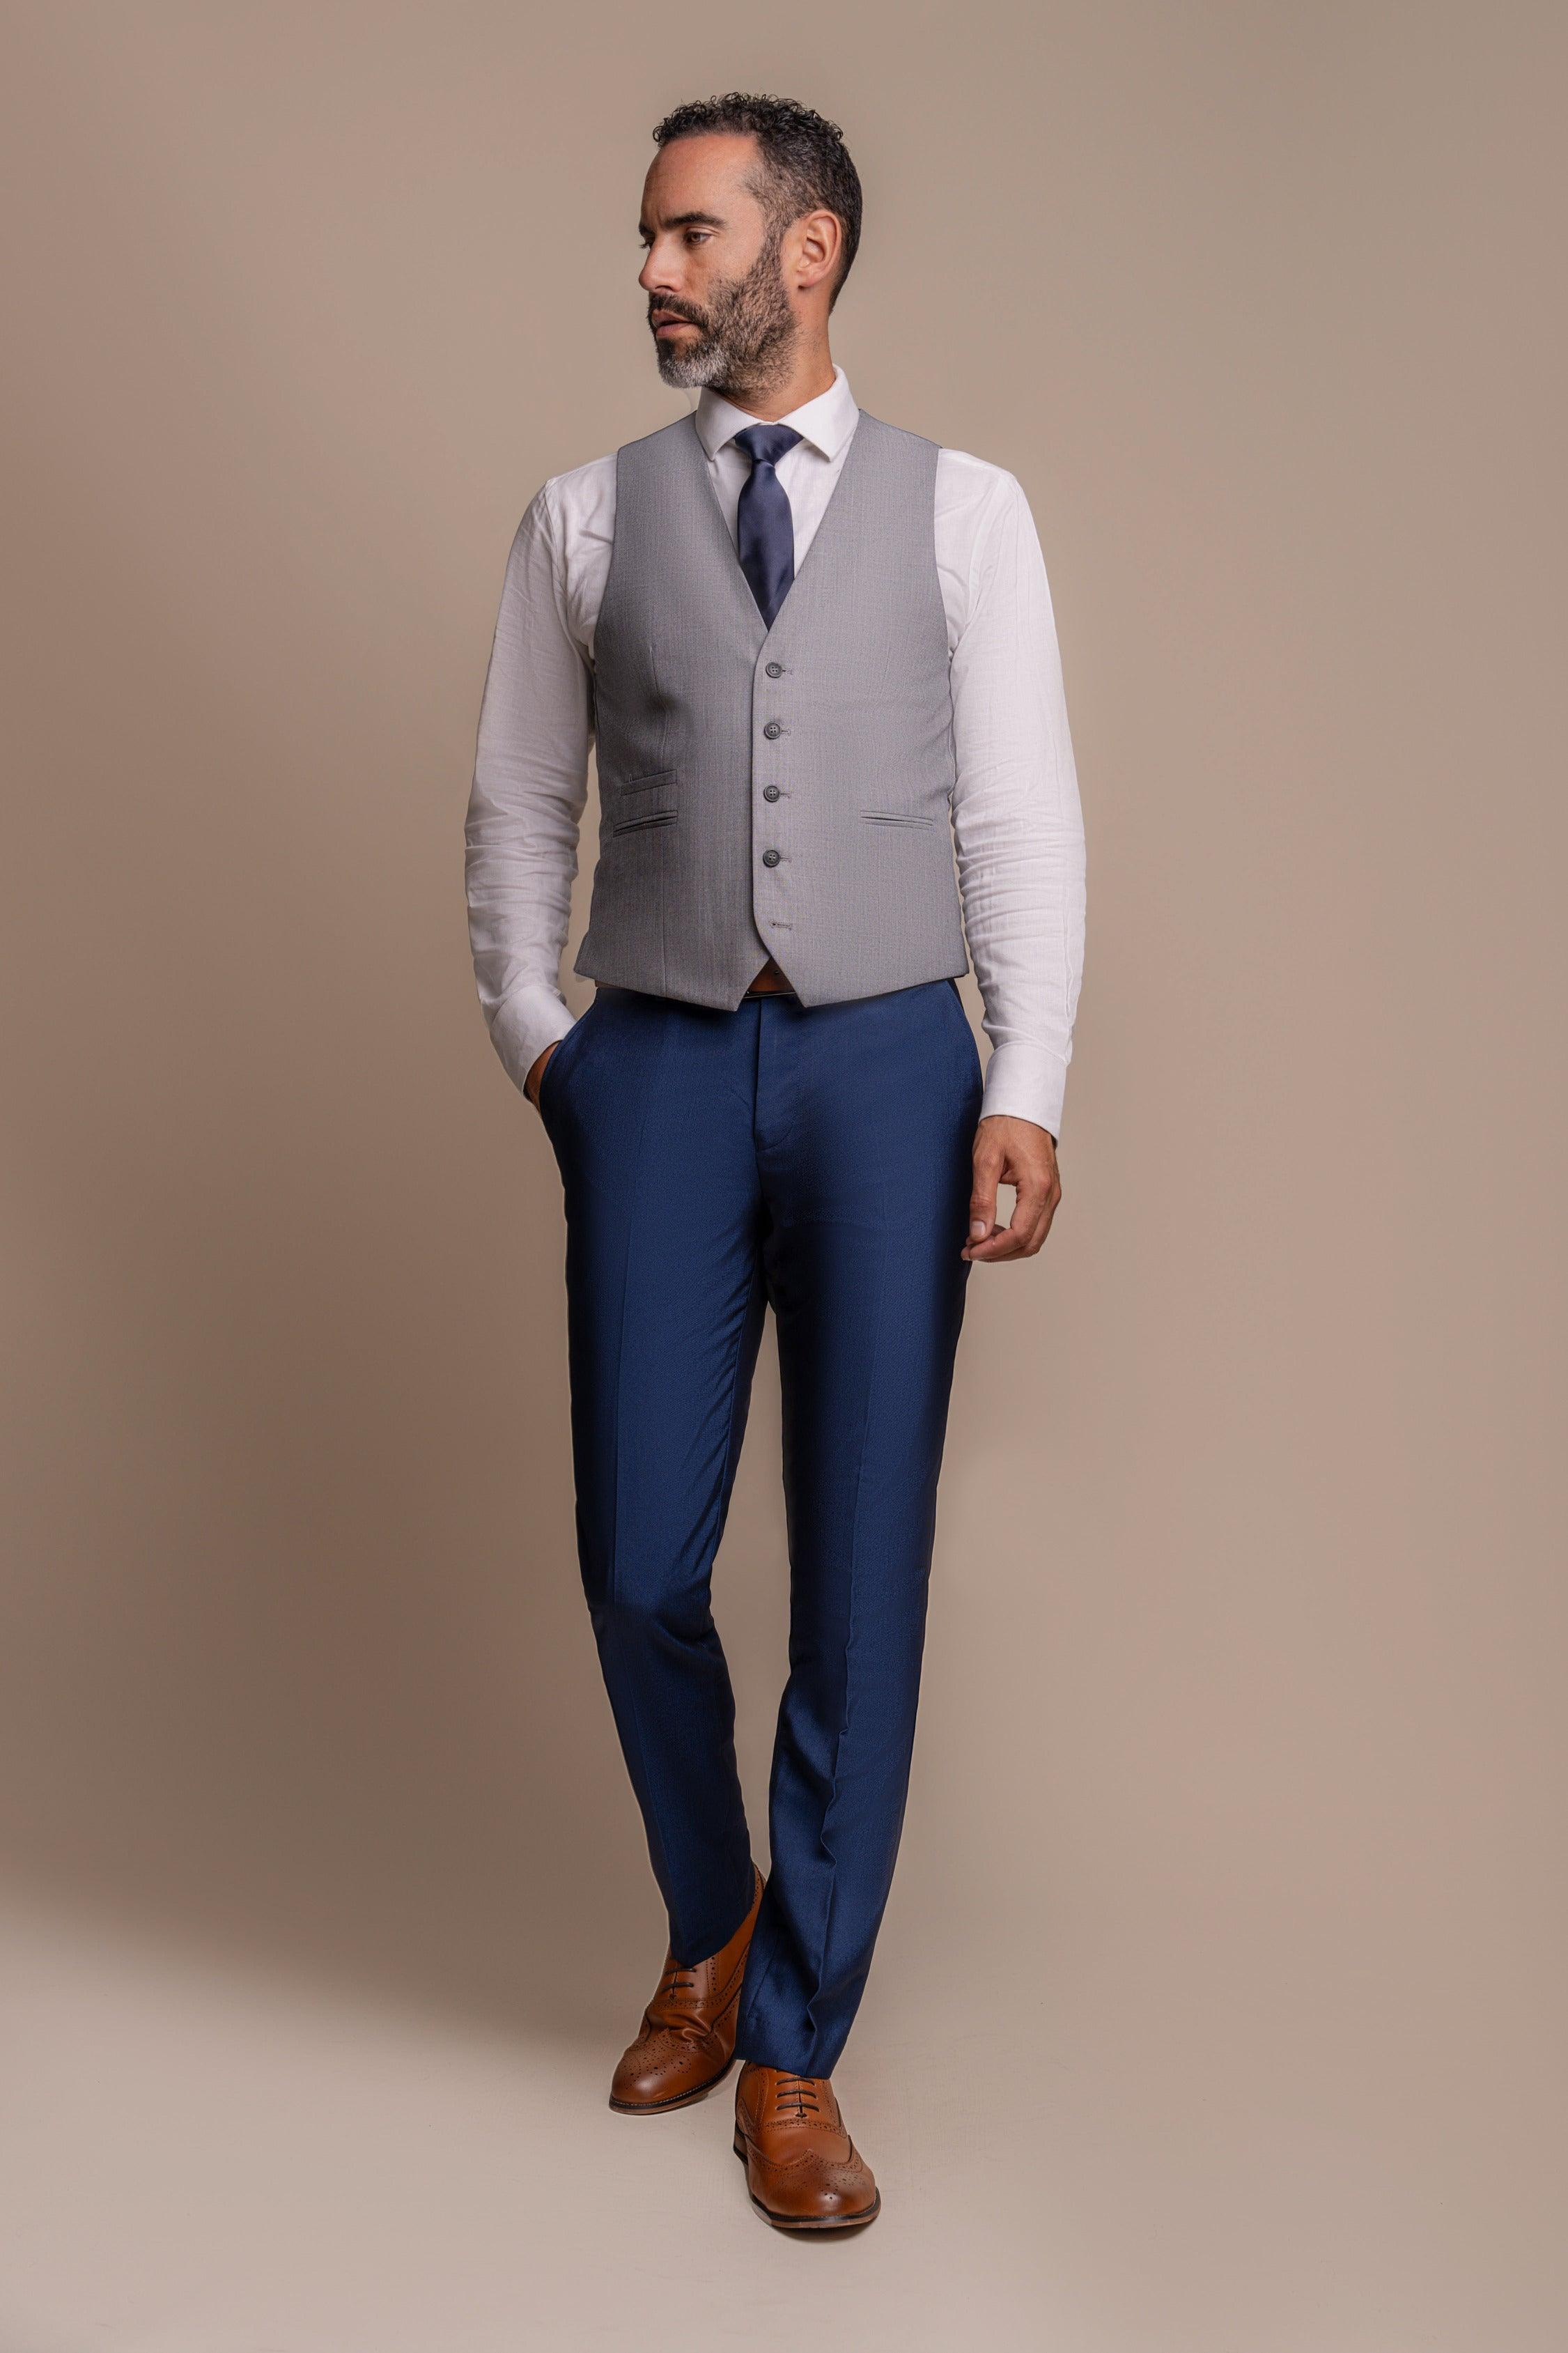 Reegan waistcoat with Ford trouser front